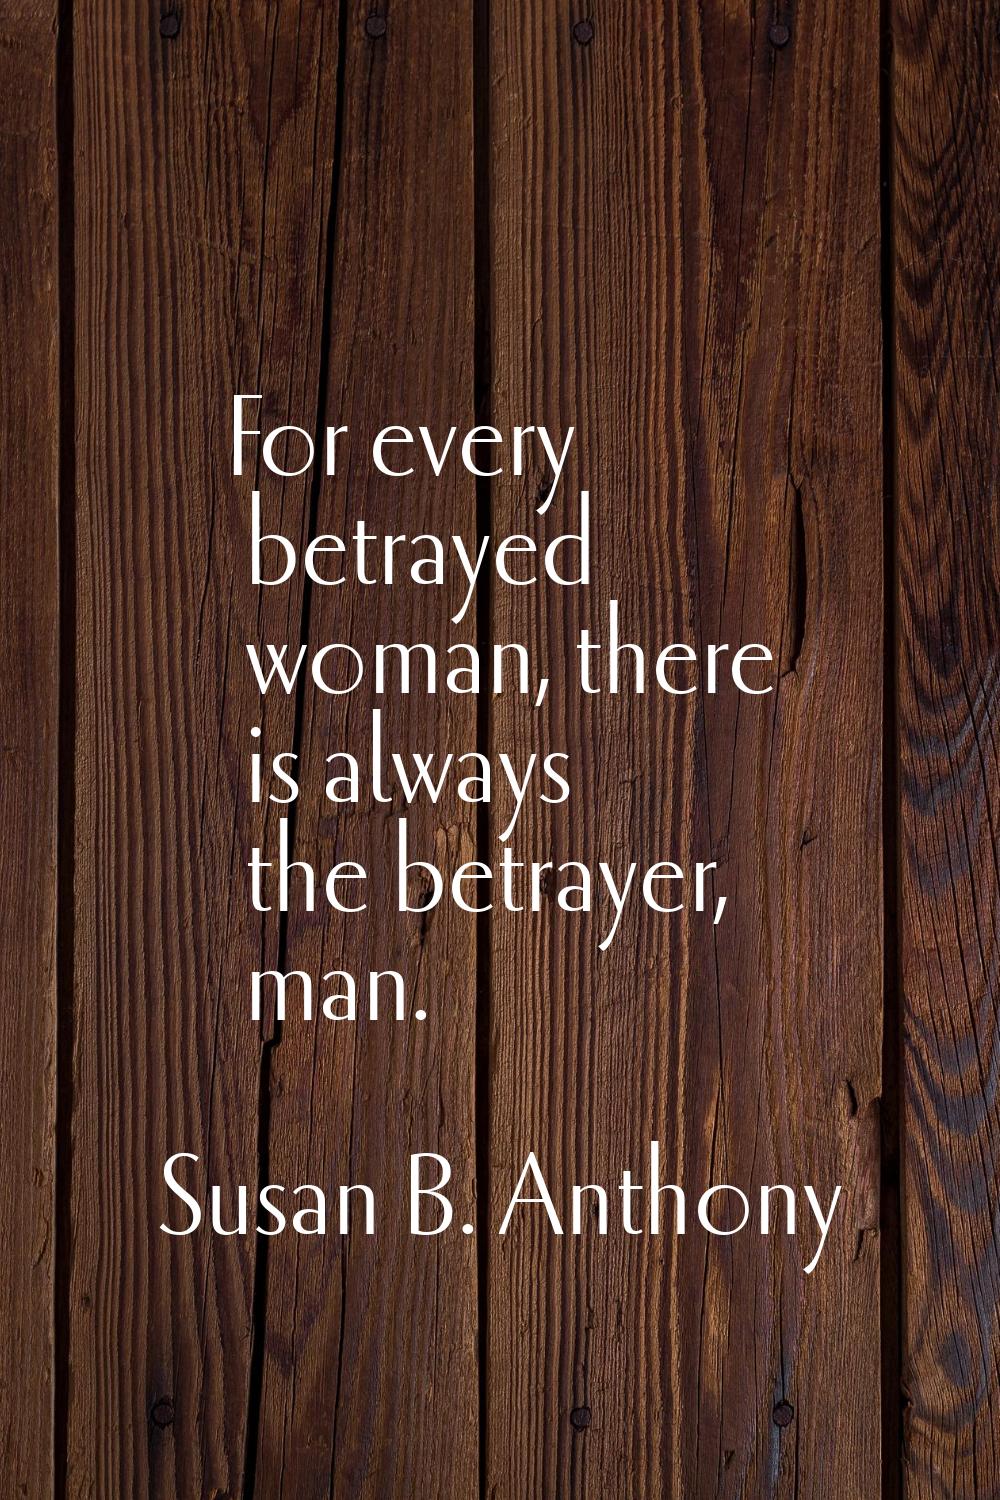 For every betrayed woman, there is always the betrayer, man.